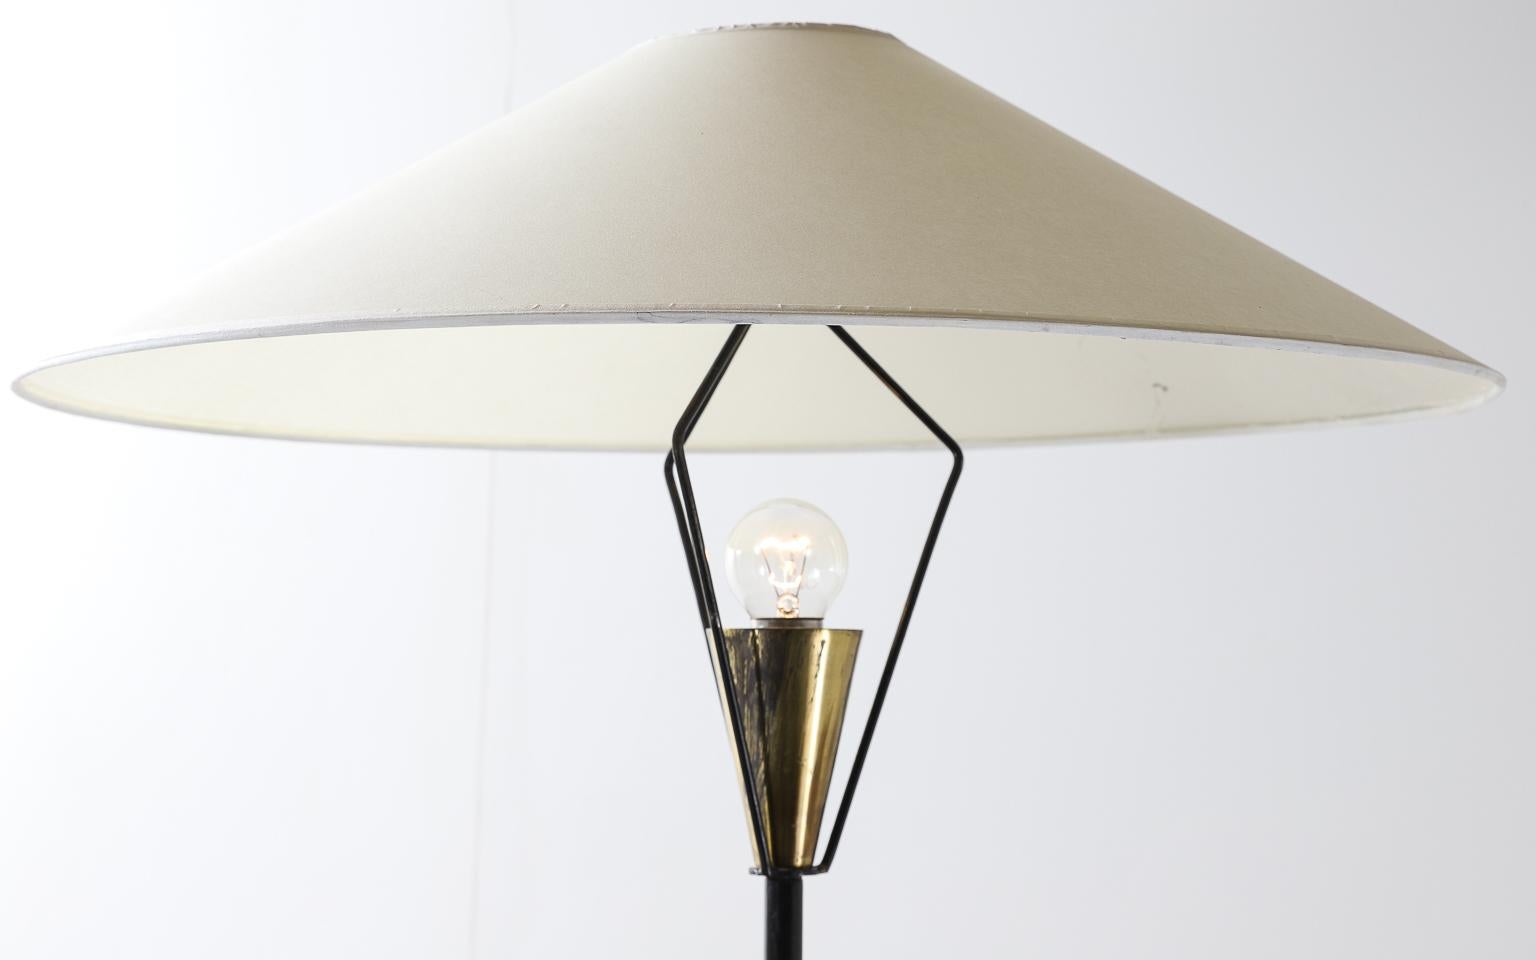 Italian Midcentury Blackened Brass Floor Lamp with Antique Brass Finished Details For Sale